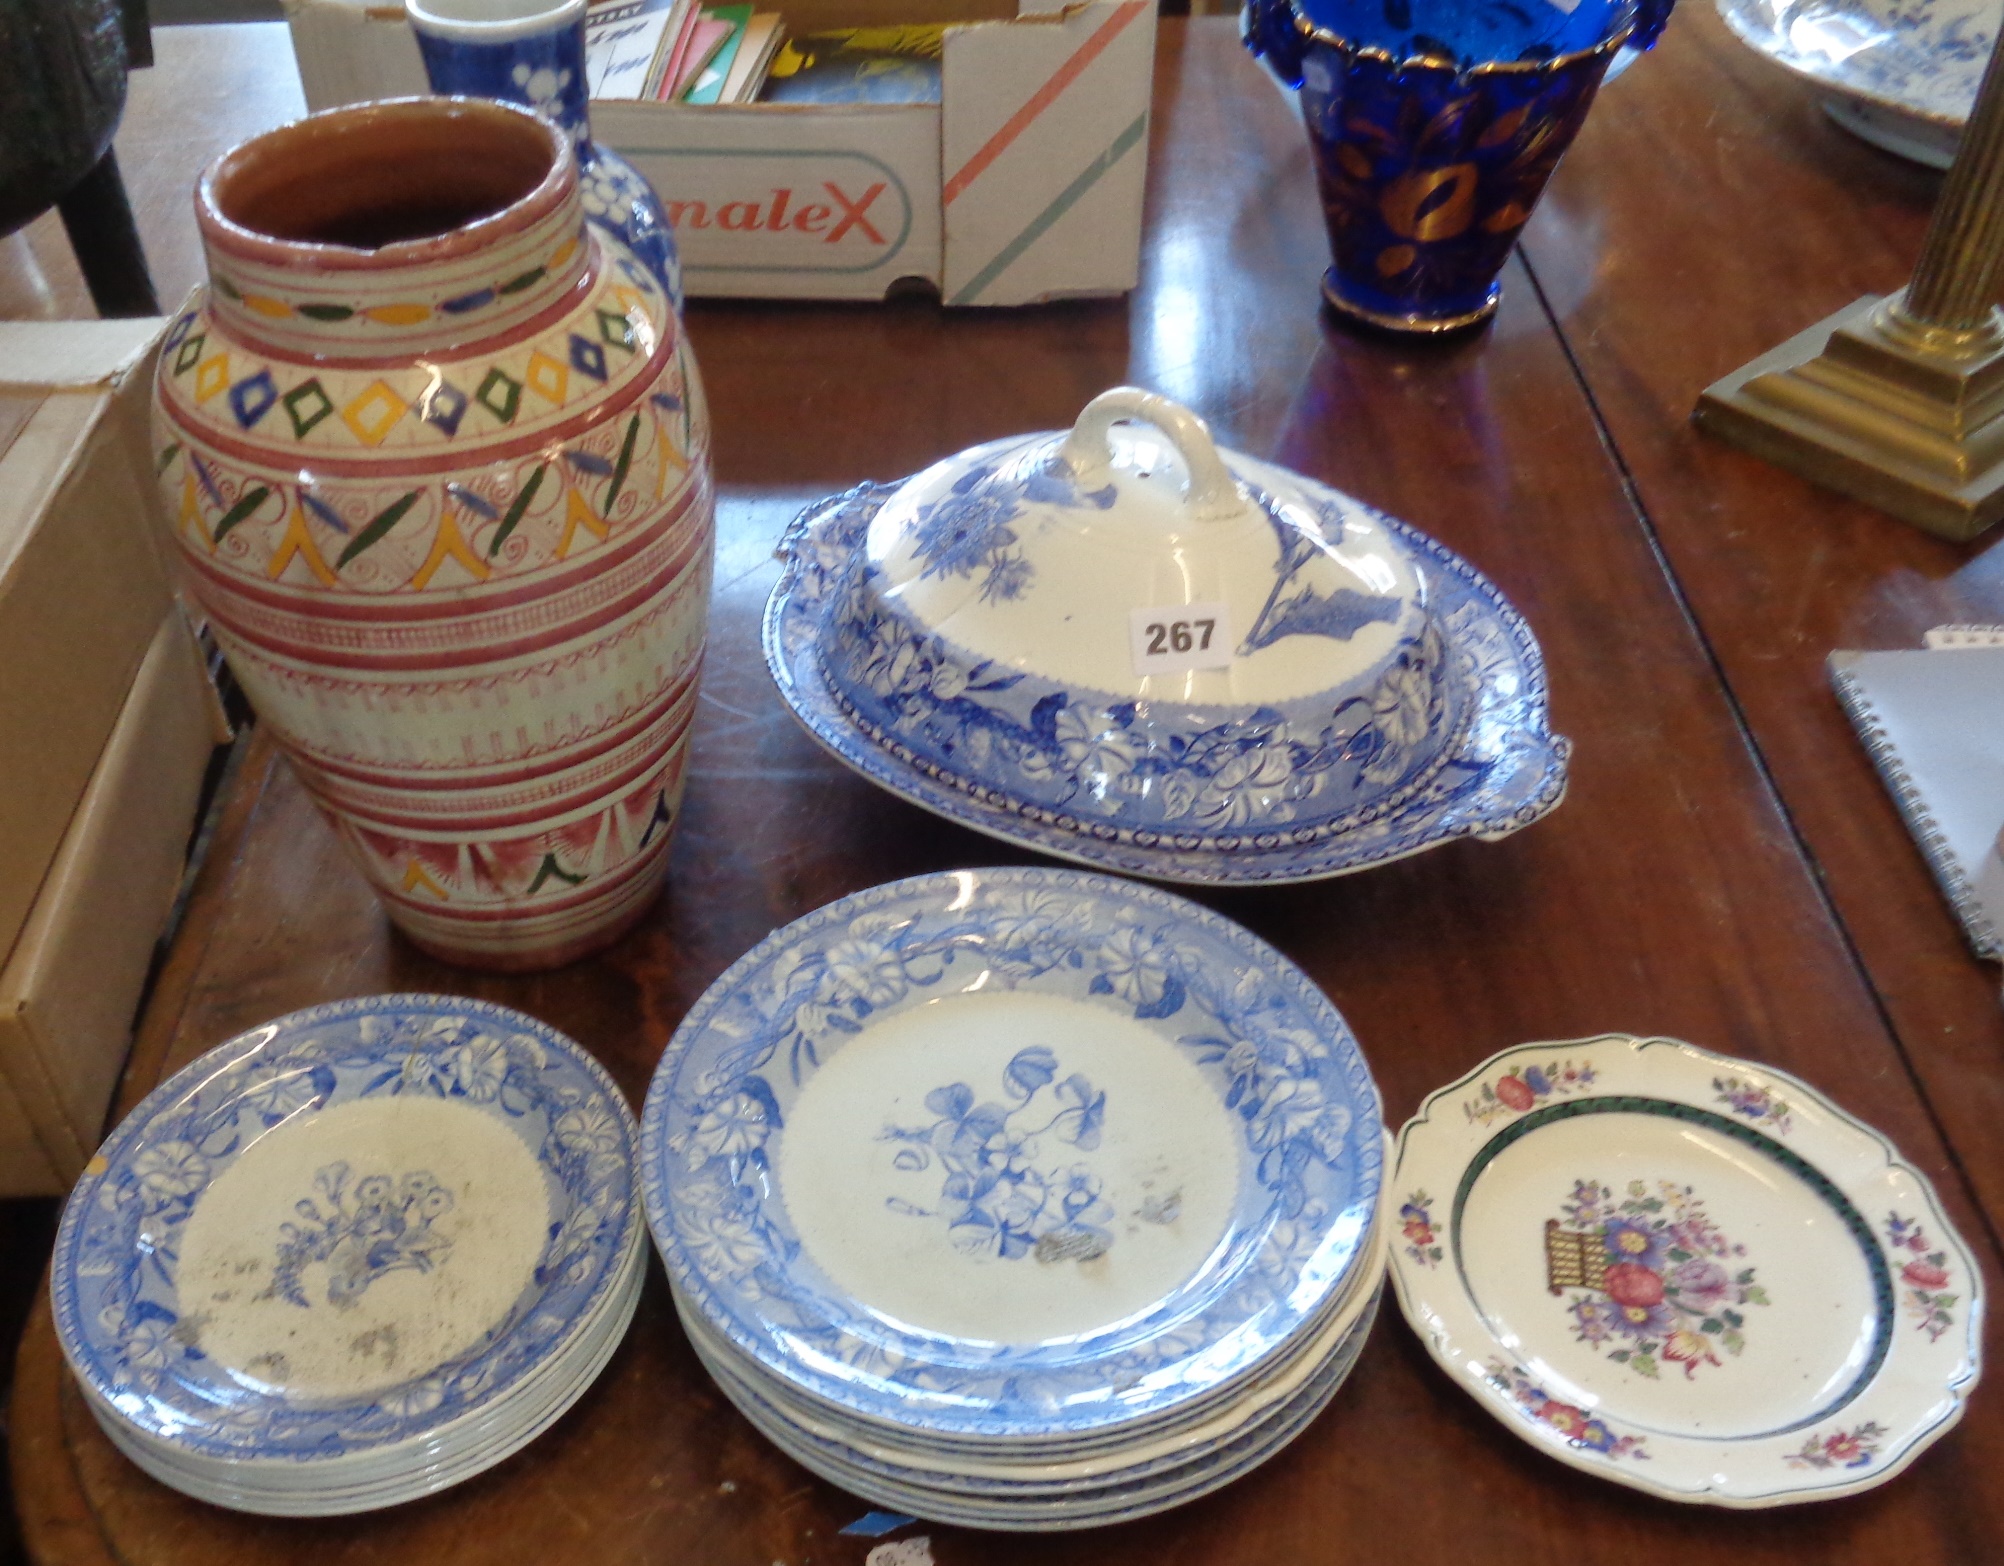 Wedgwood blue and white tureen, side plates, a Persian polychrome pottery vase etc.